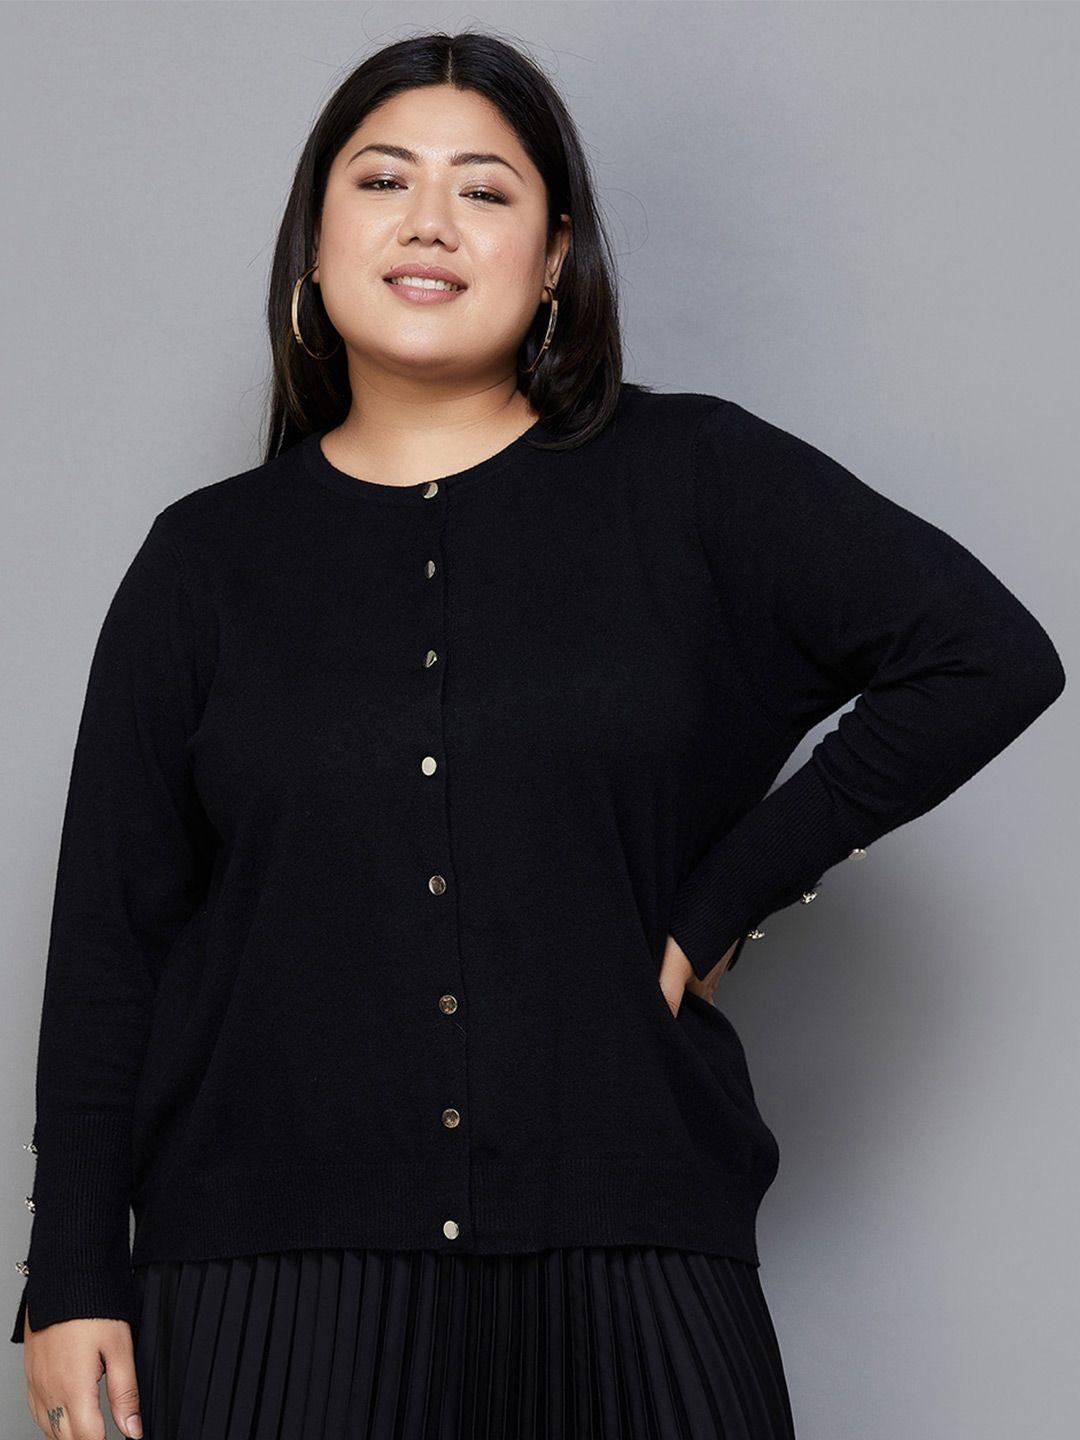 nexus by lifestyle shirt style top